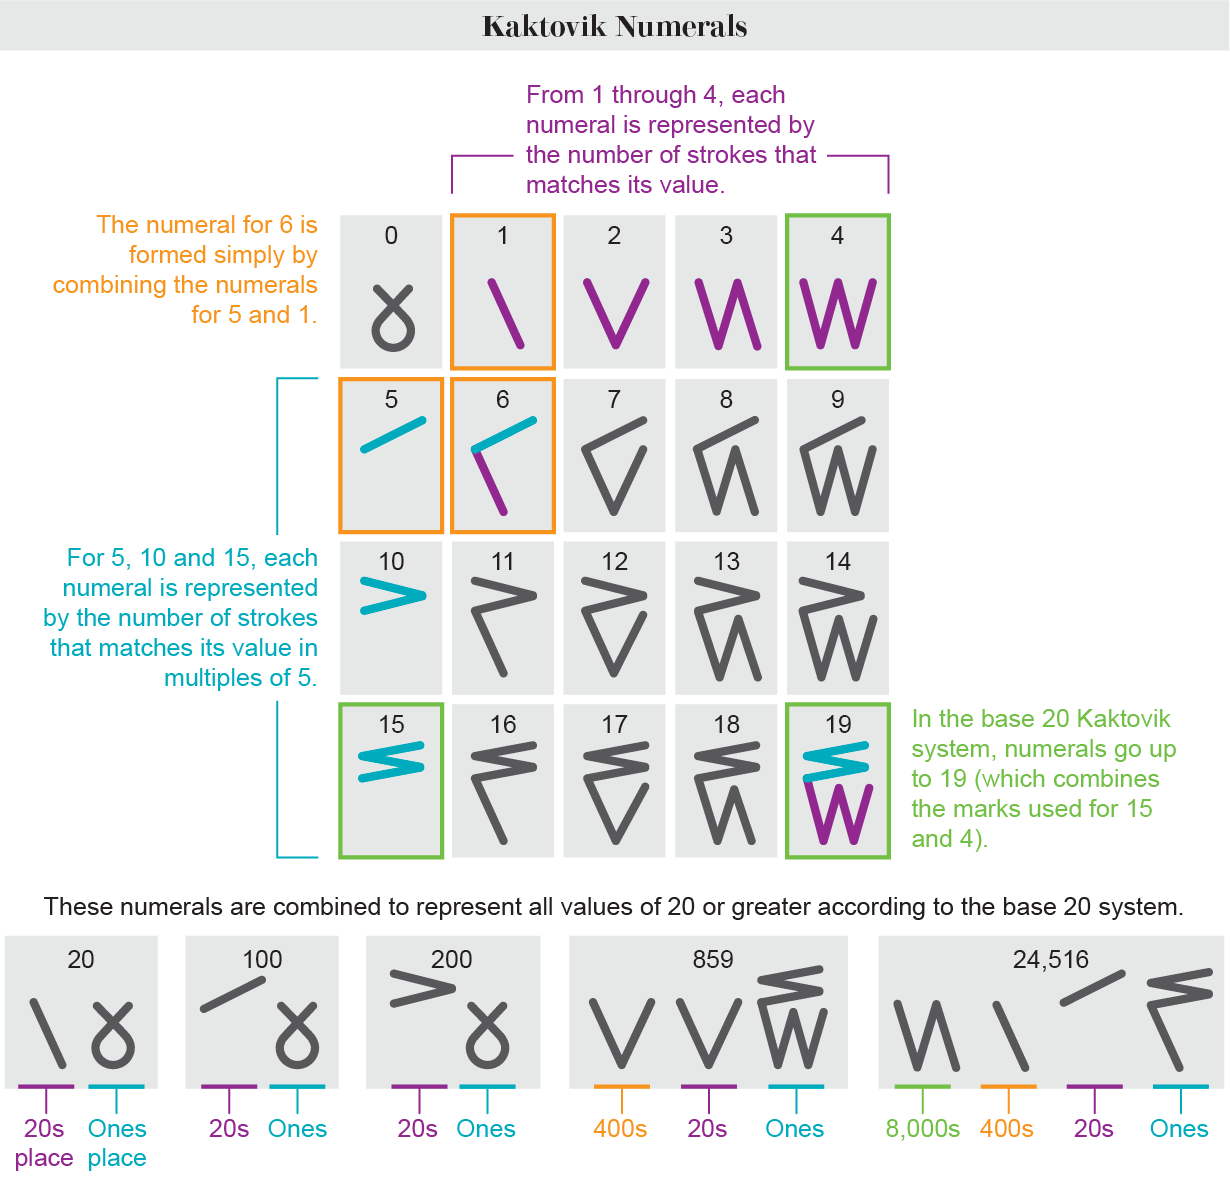 Graphic shows Kaktovik numerals representing values from 0 through 19 and a few examples of larger numbers to show how the base 20 system works.